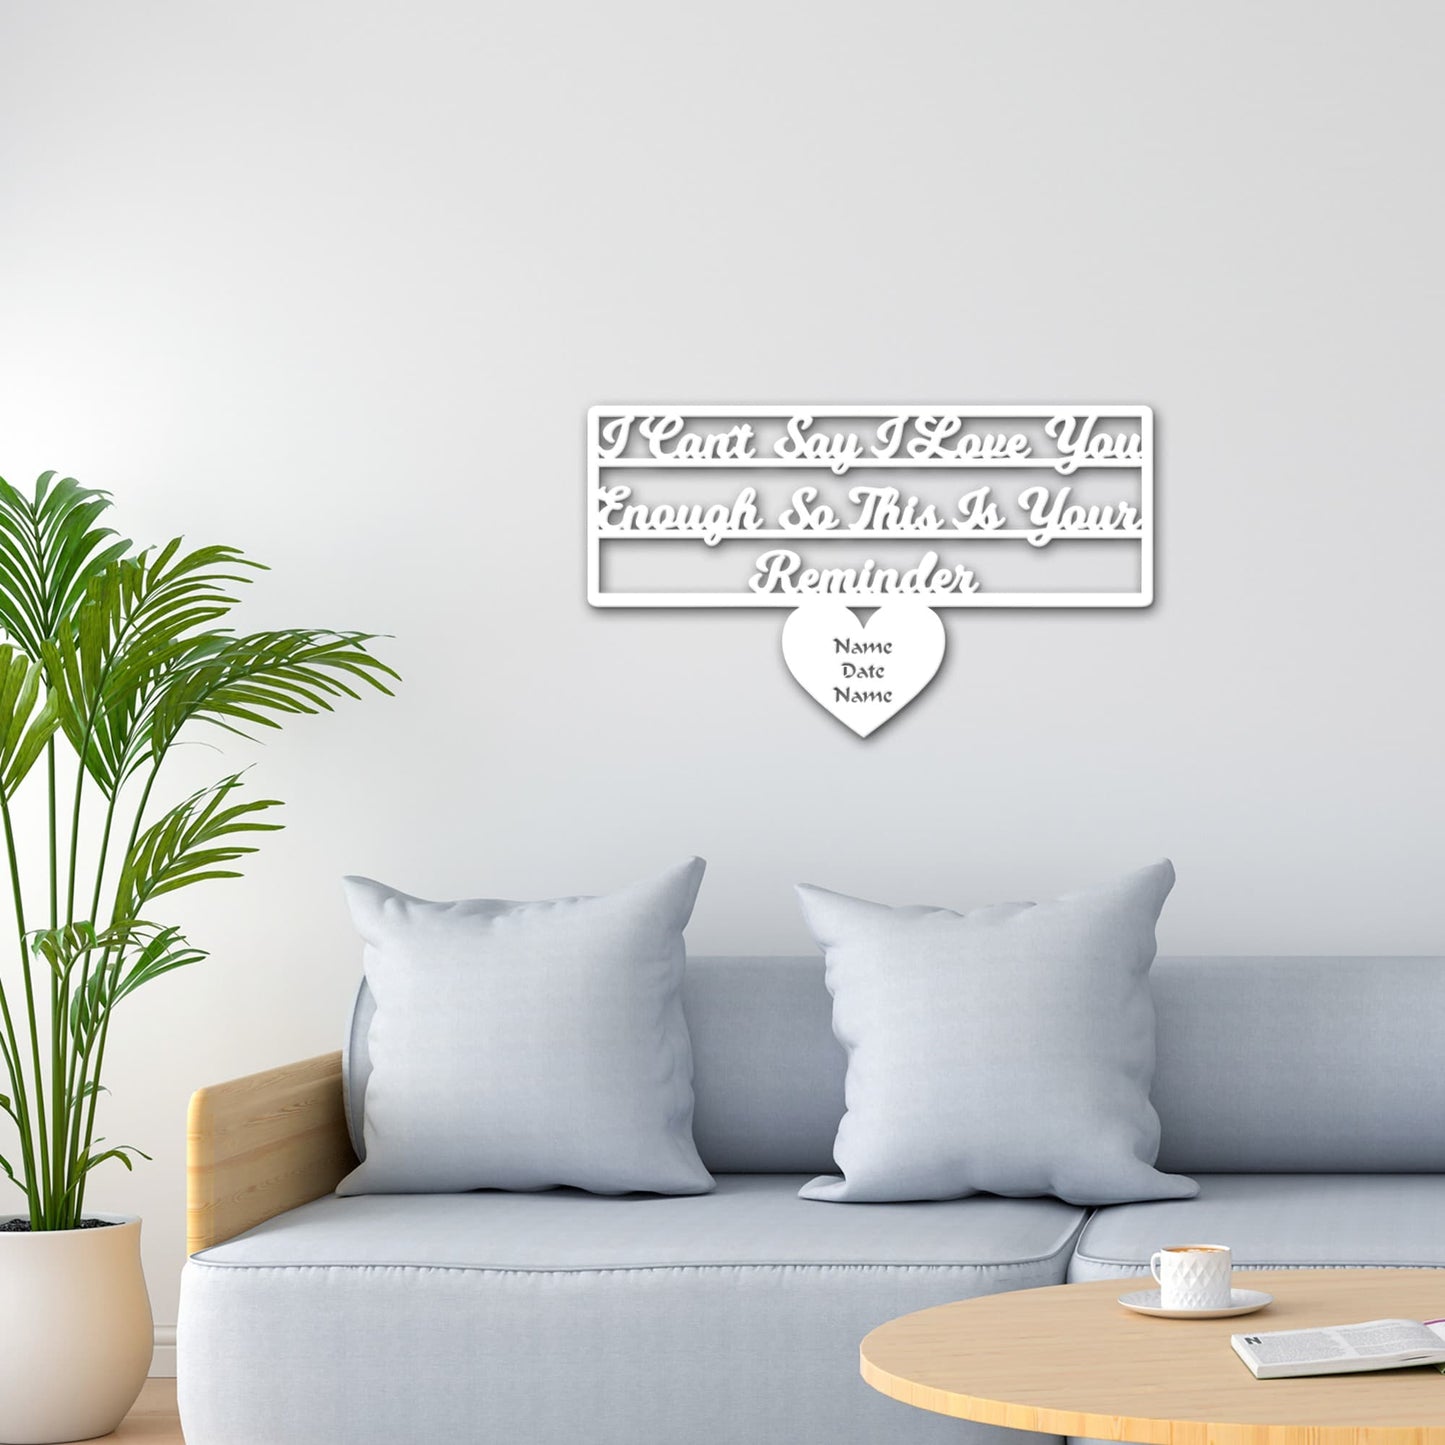 Love Reminder - Personalized Wall Decor with optional LED Light | Starting from: